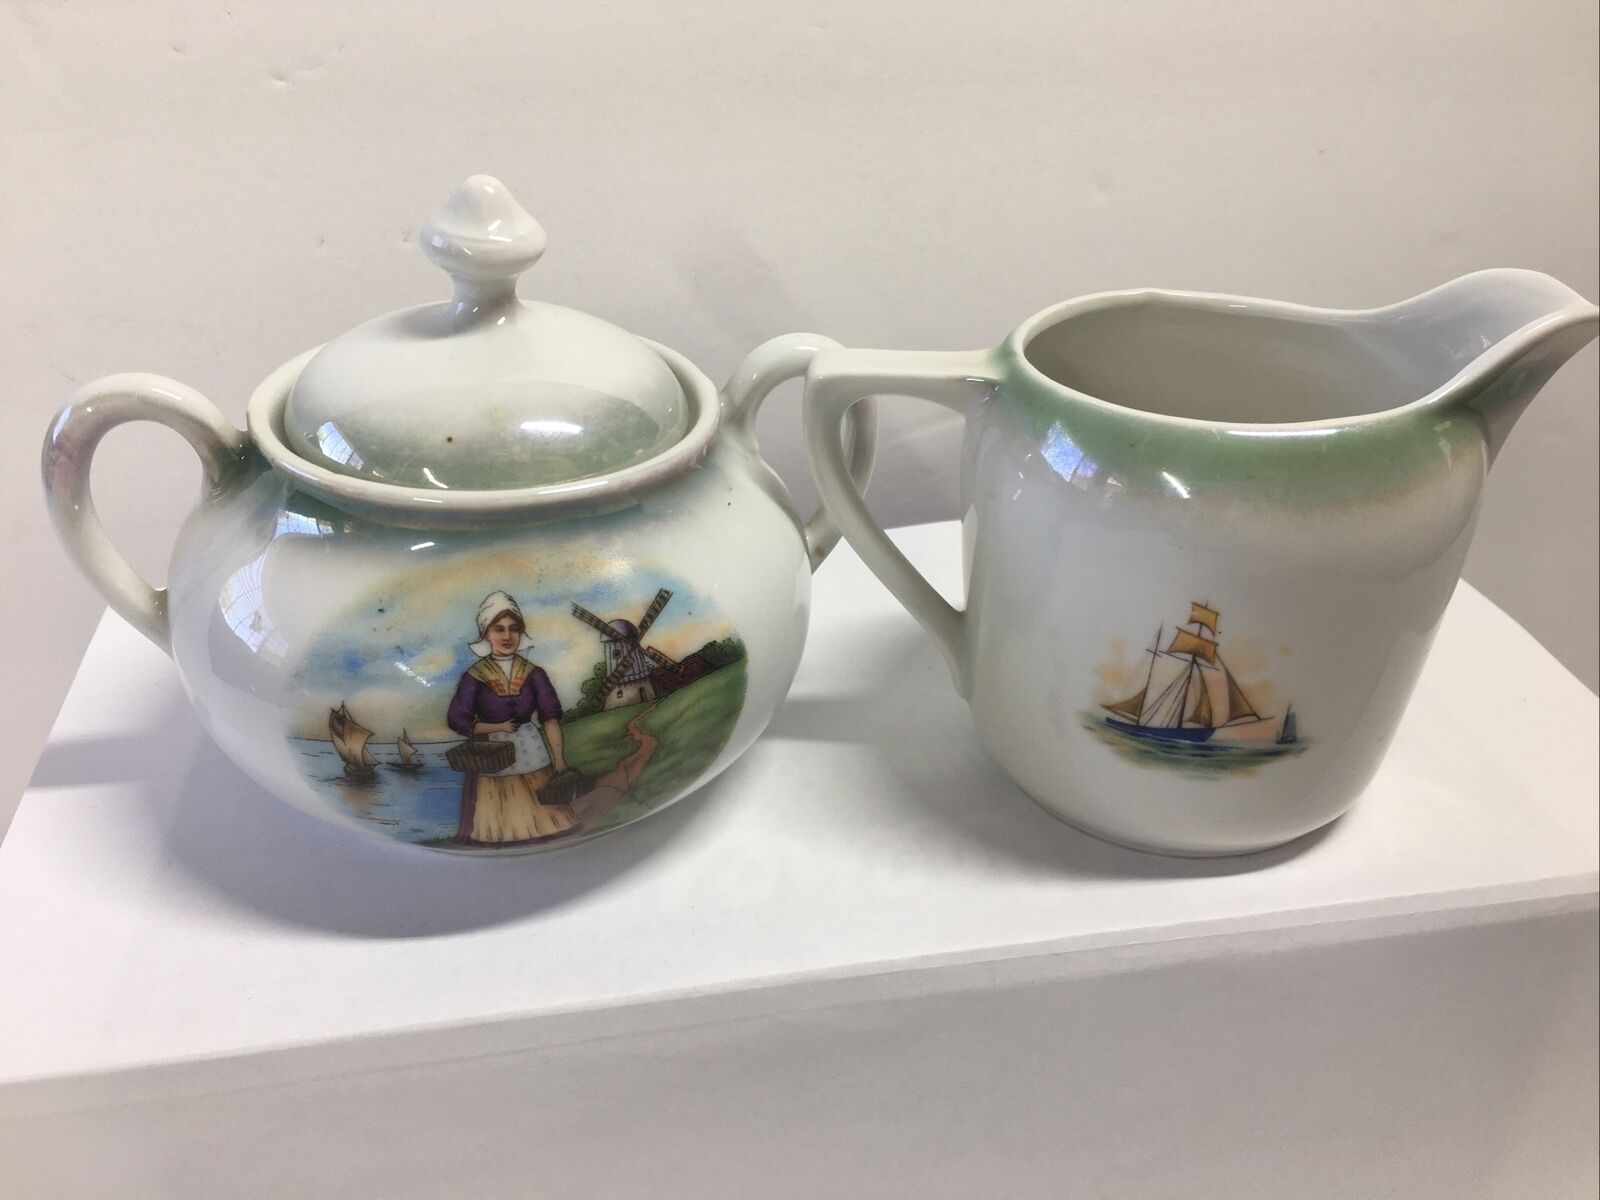 Vintage Shumann 1920s Germany Sugar and Creamer Antique Windmill Ship